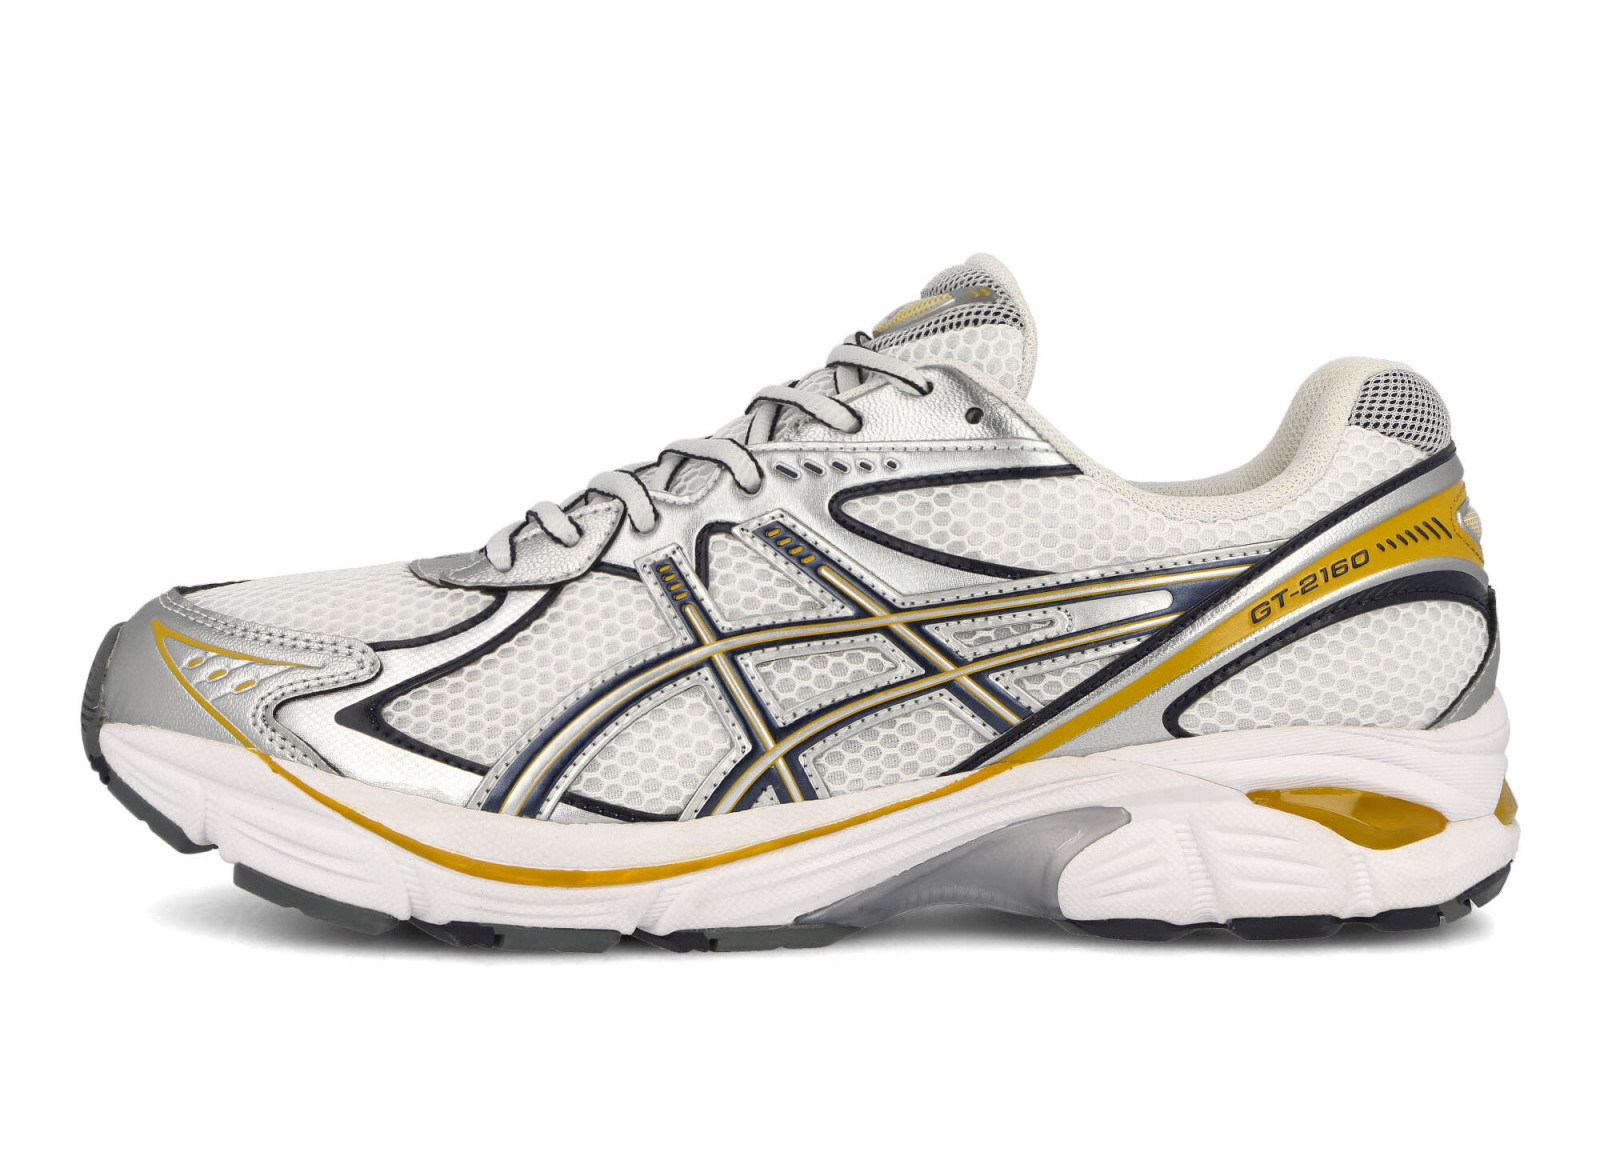 Asics GT-2160
White / Pure Silver